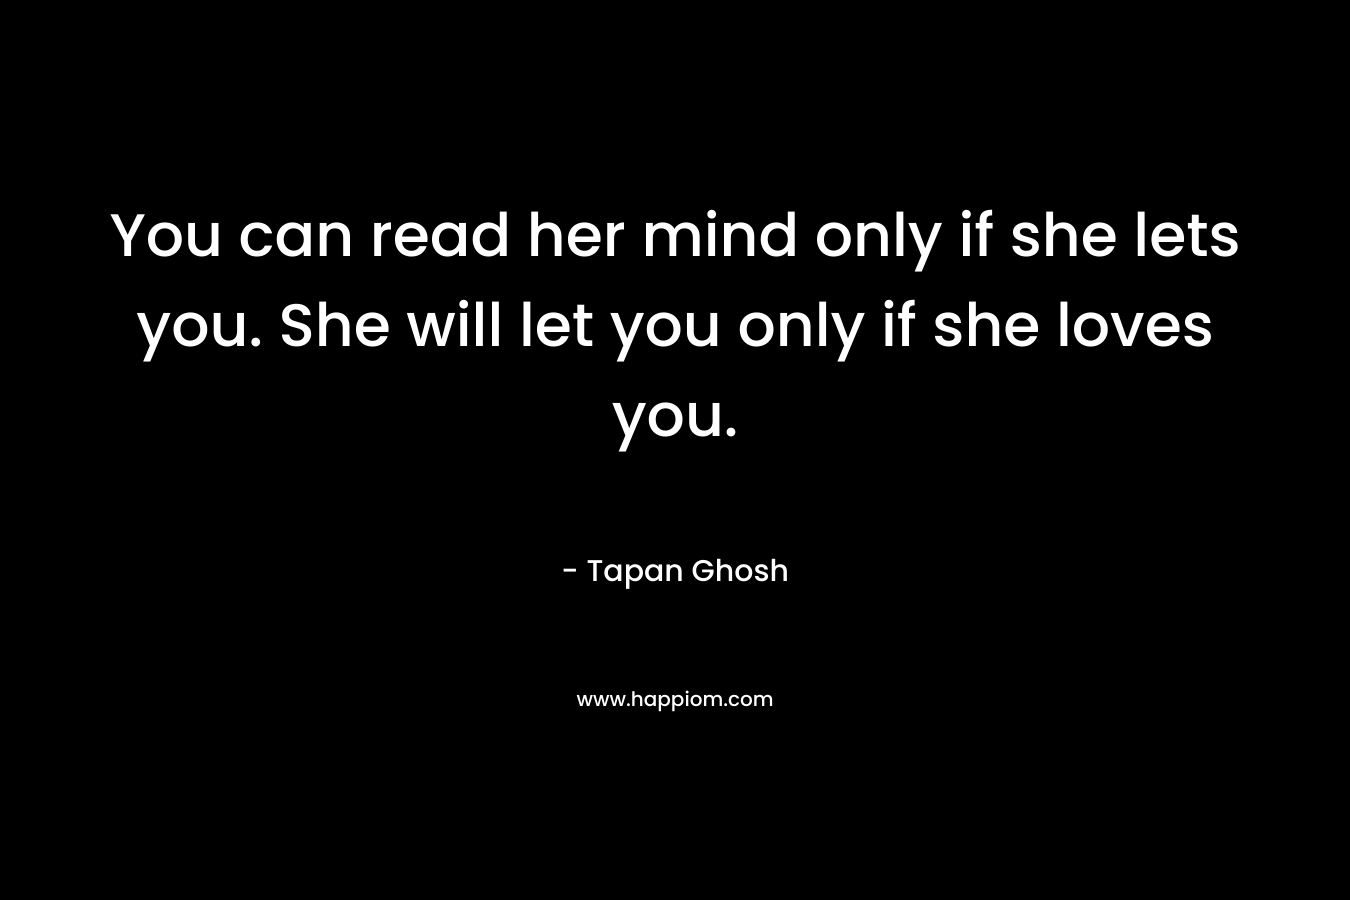 You can read her mind only if she lets you. She will let you only if she loves you.